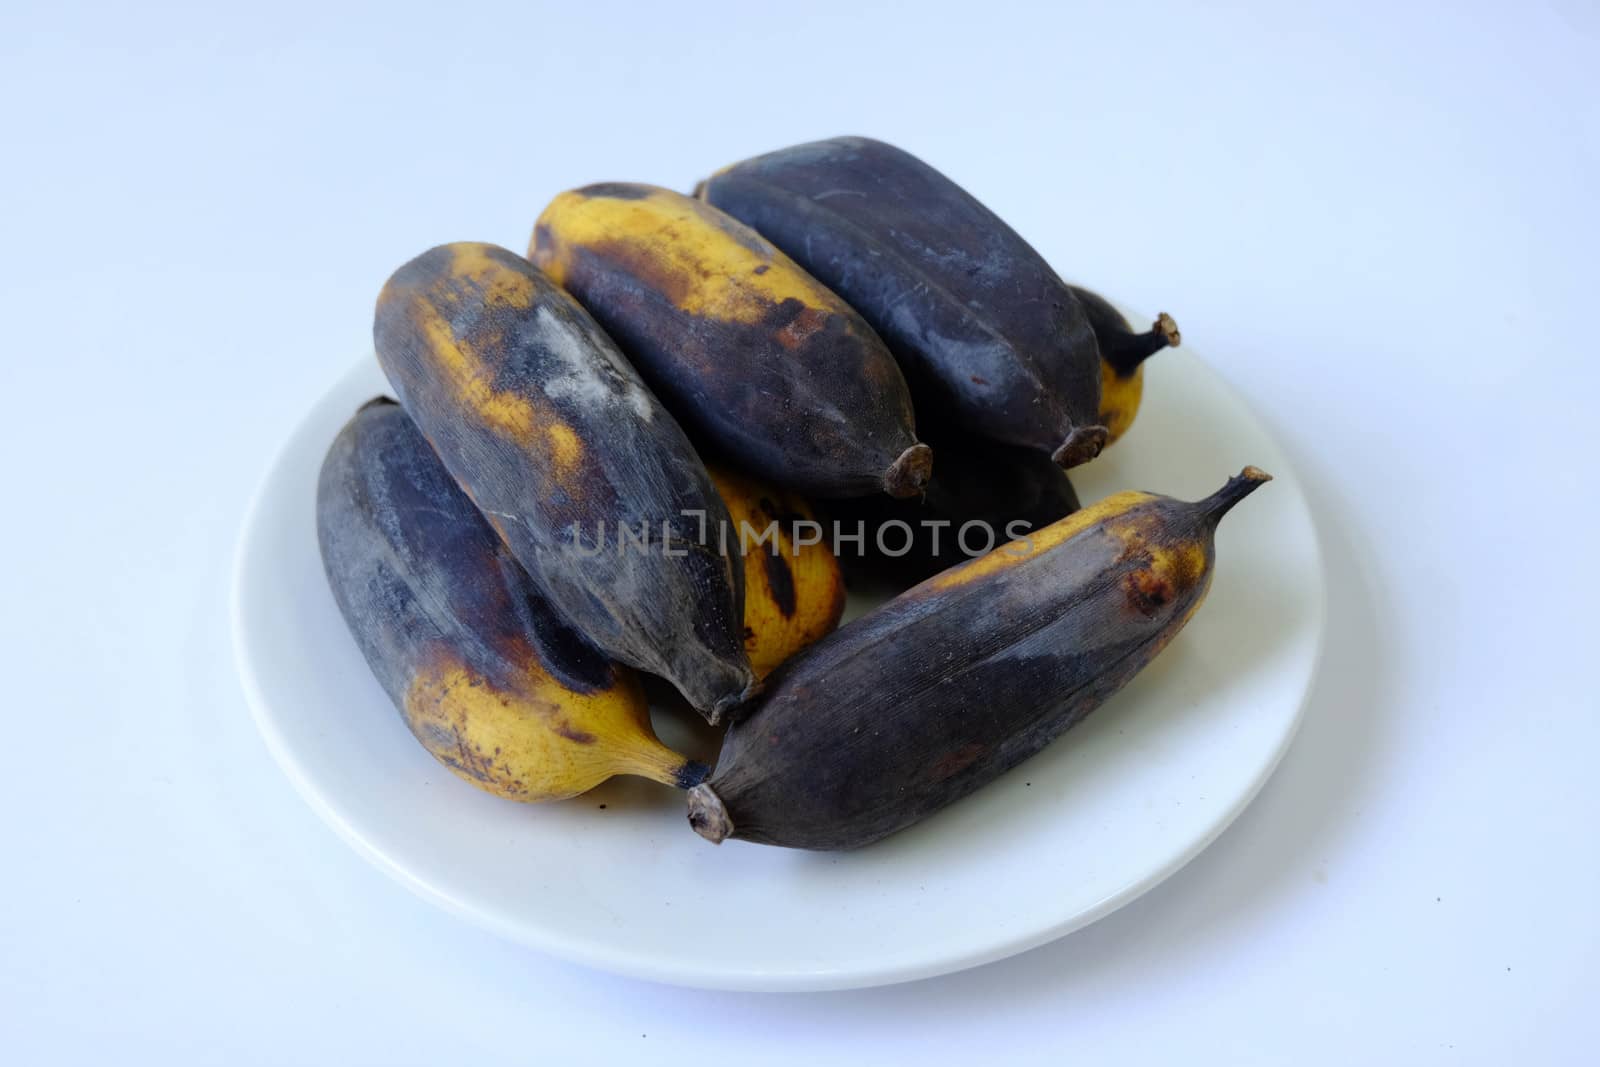 Rotten banana mold Isolated in a white dish on white background.